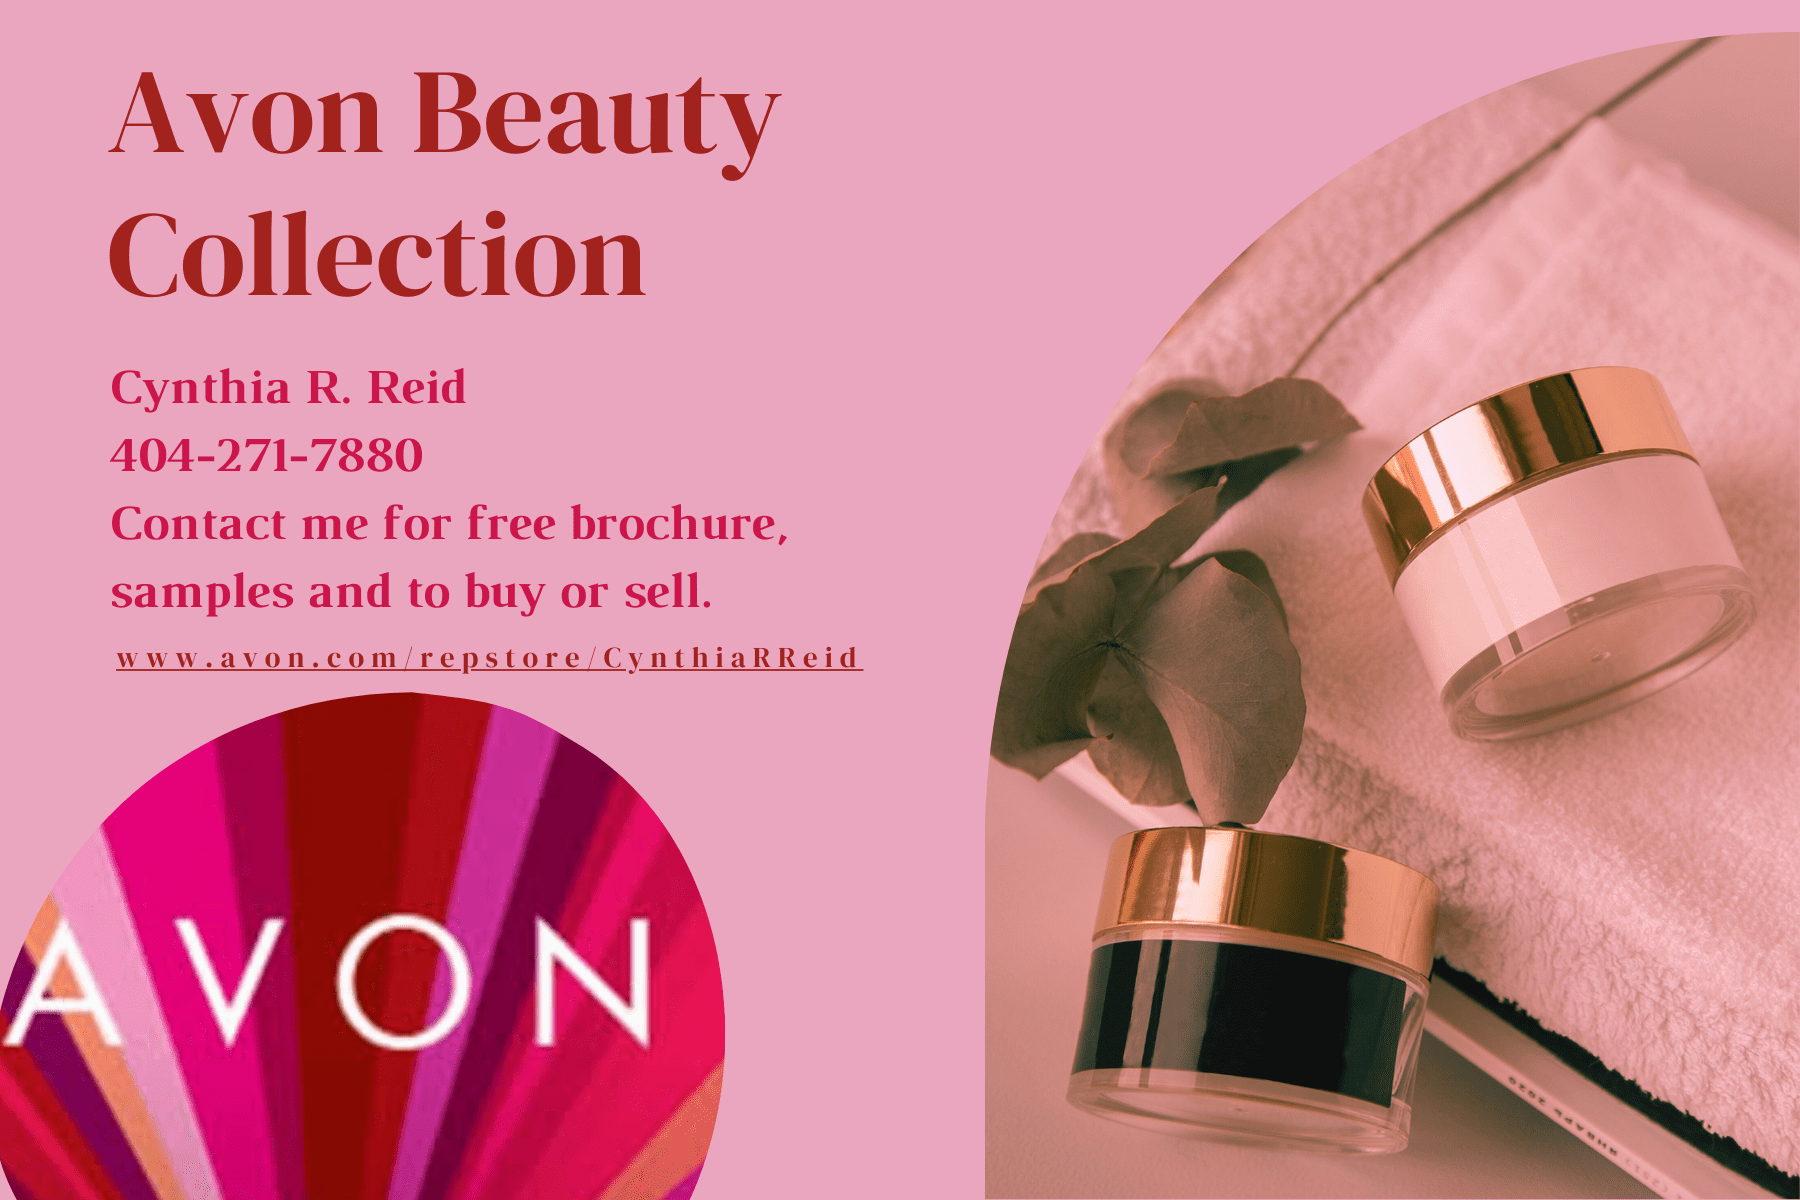 Featured image for “Avon Beauty Collection”